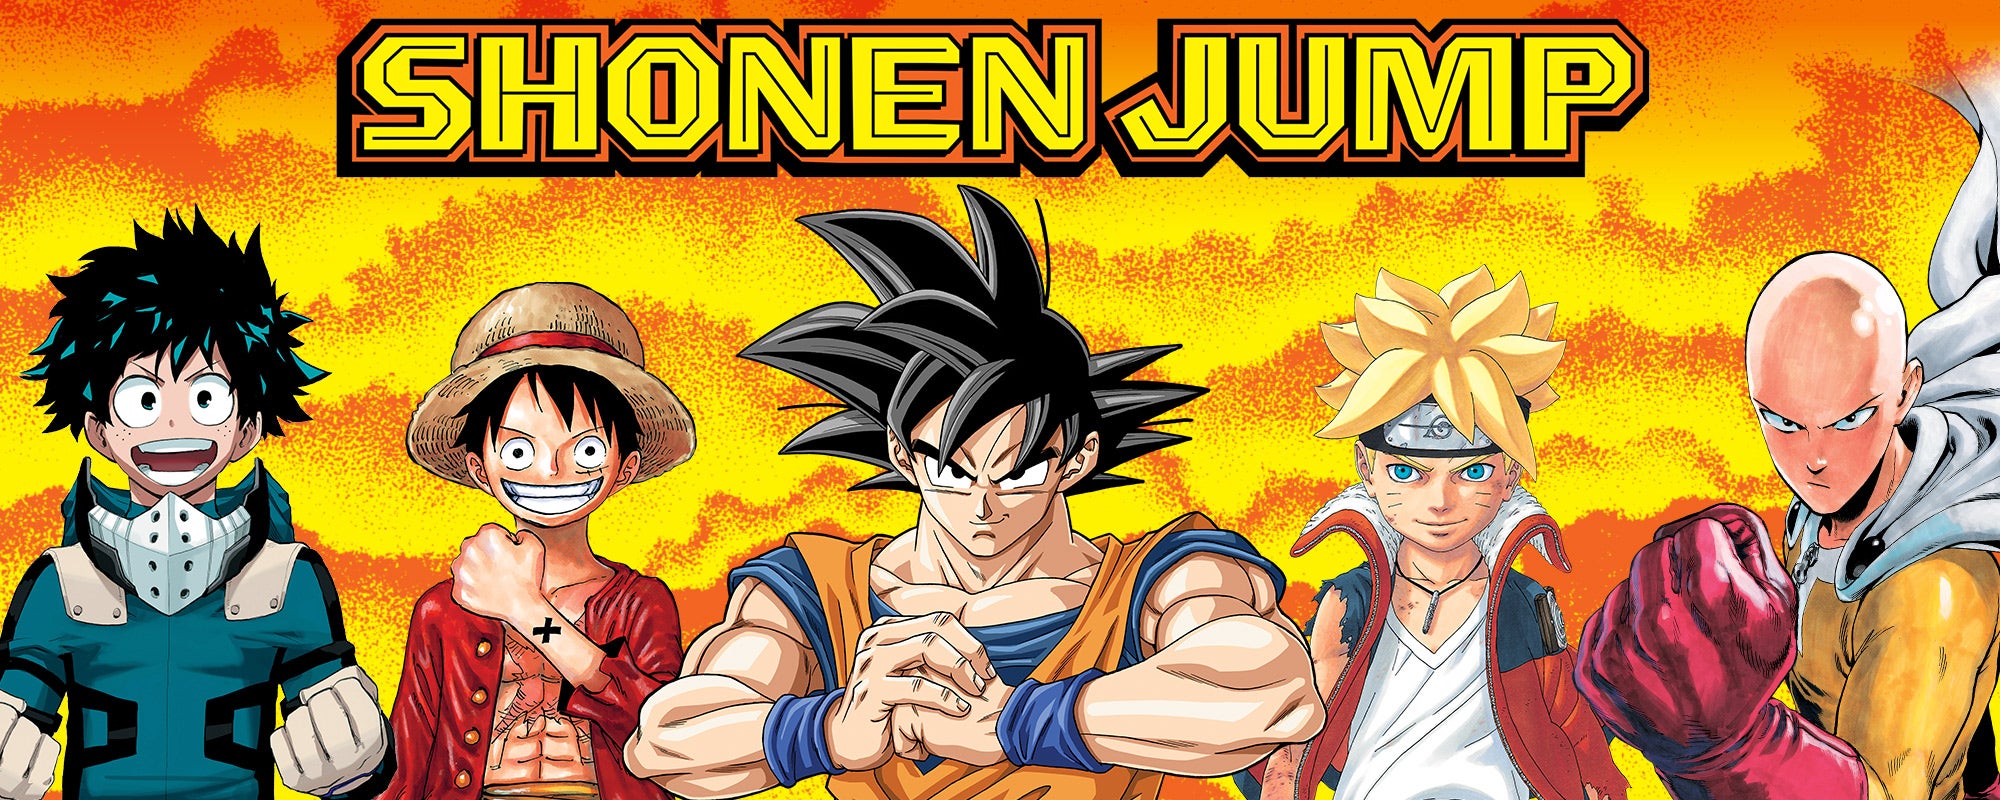 An orange fiery banner featuring characters like Naruto and One Punch Man. At the top of the banner, it reads Shonen Jump